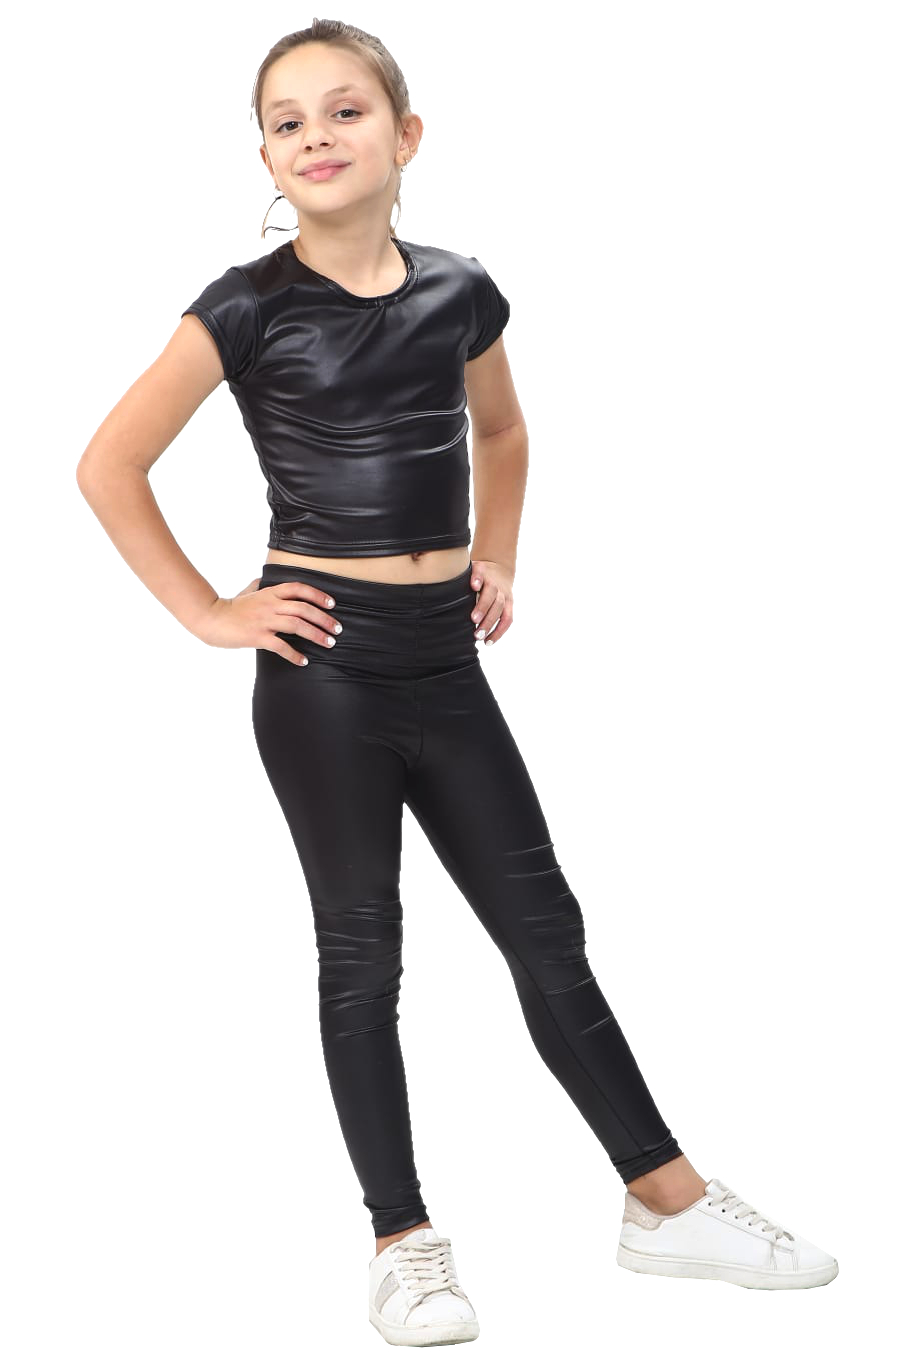 Girls Wet Look Outfit Crop Top and Leggings New Metallic Black Shiny  Stretch Set